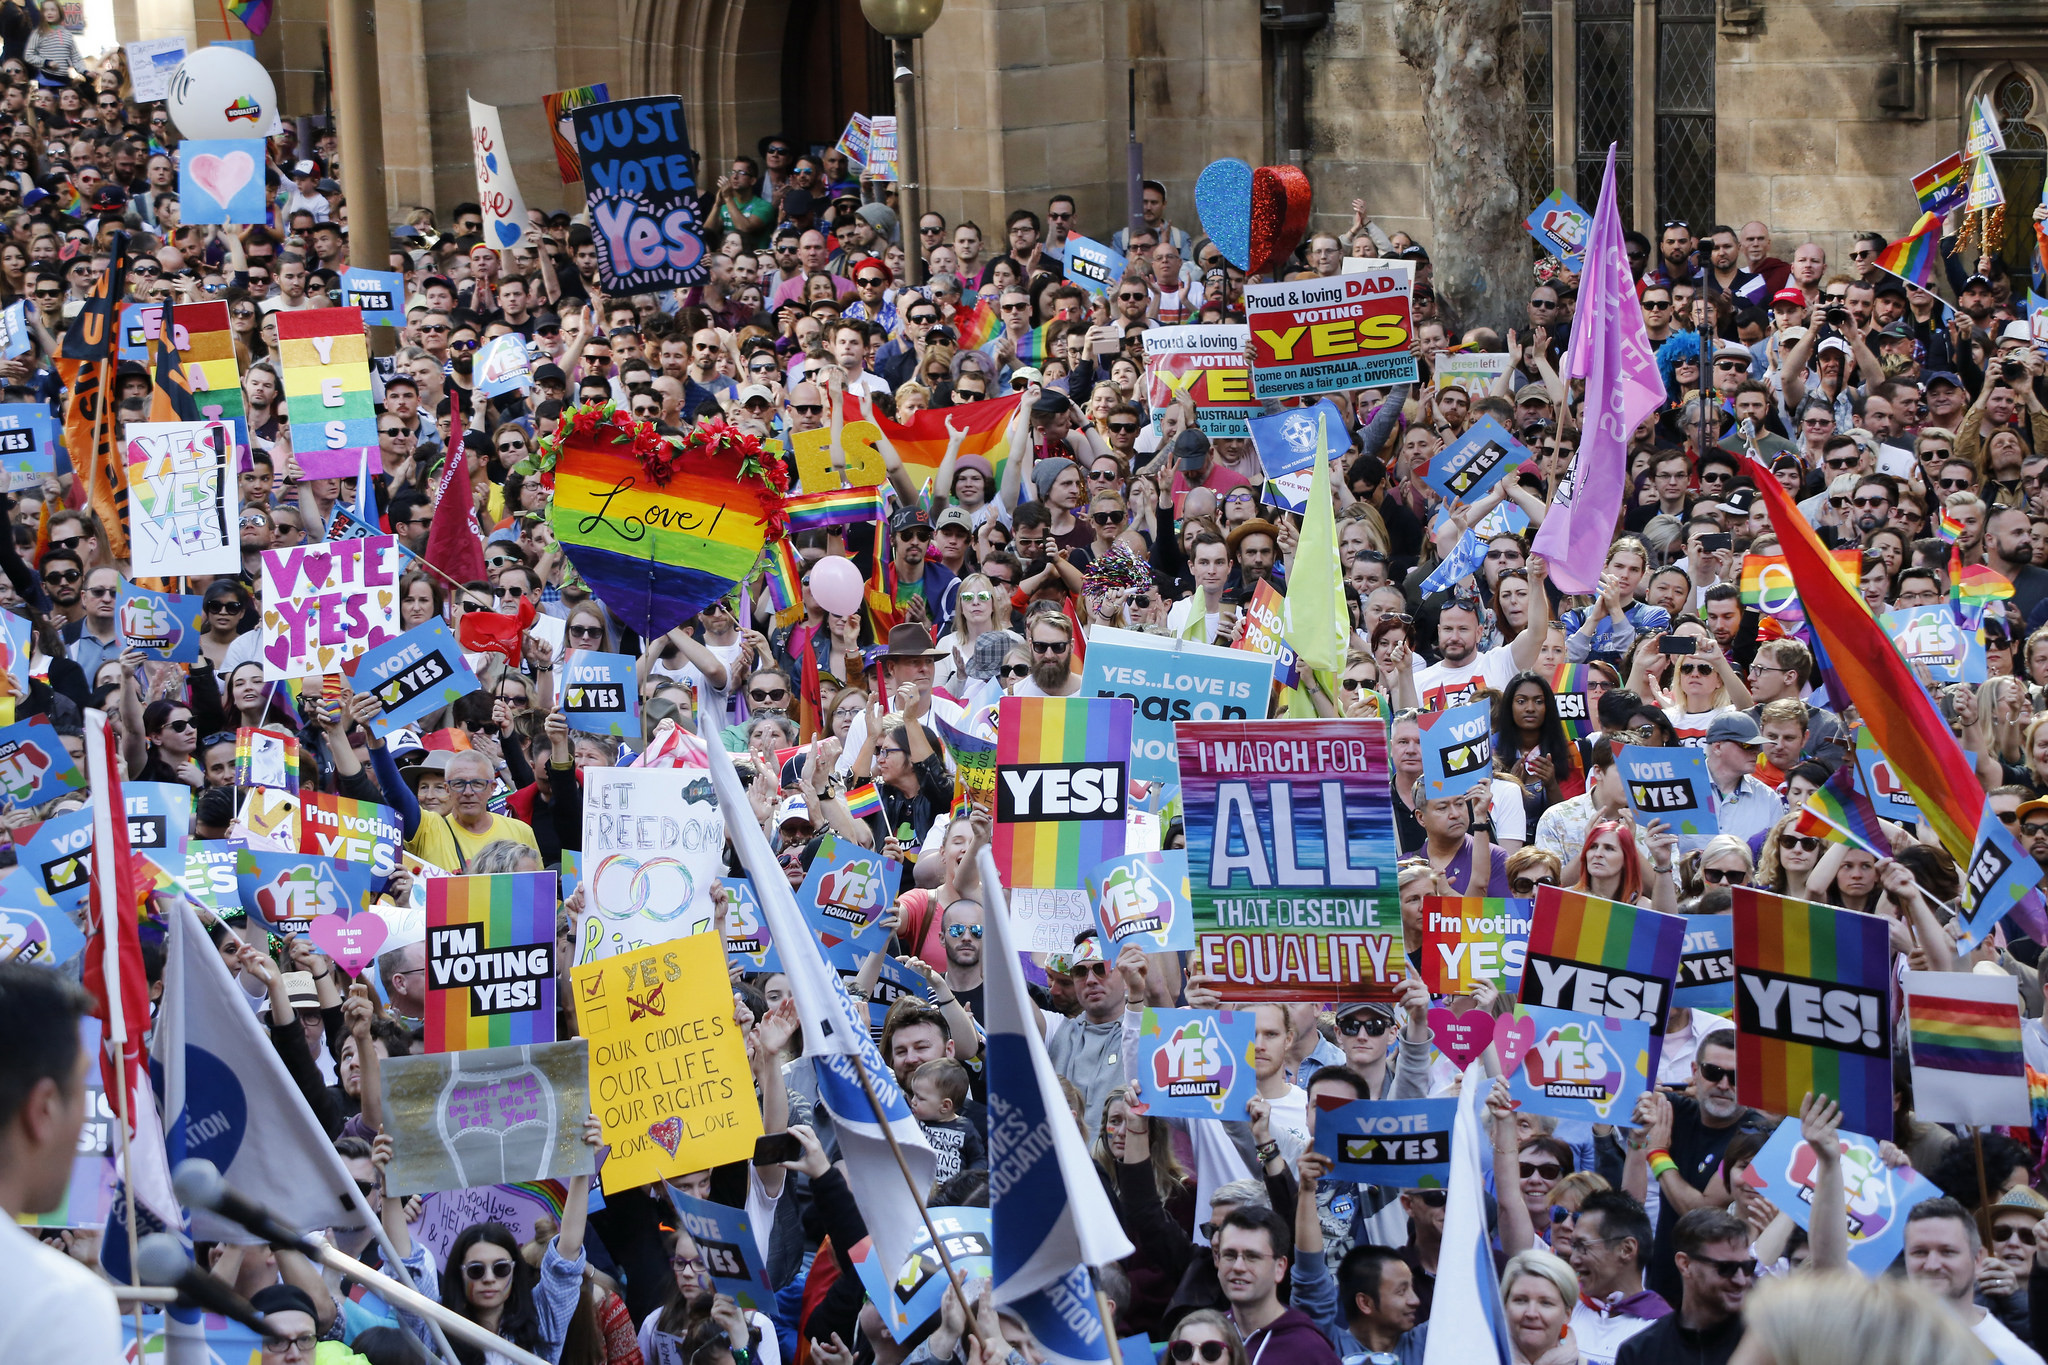 YES Rally for Marriage Equality pt 2